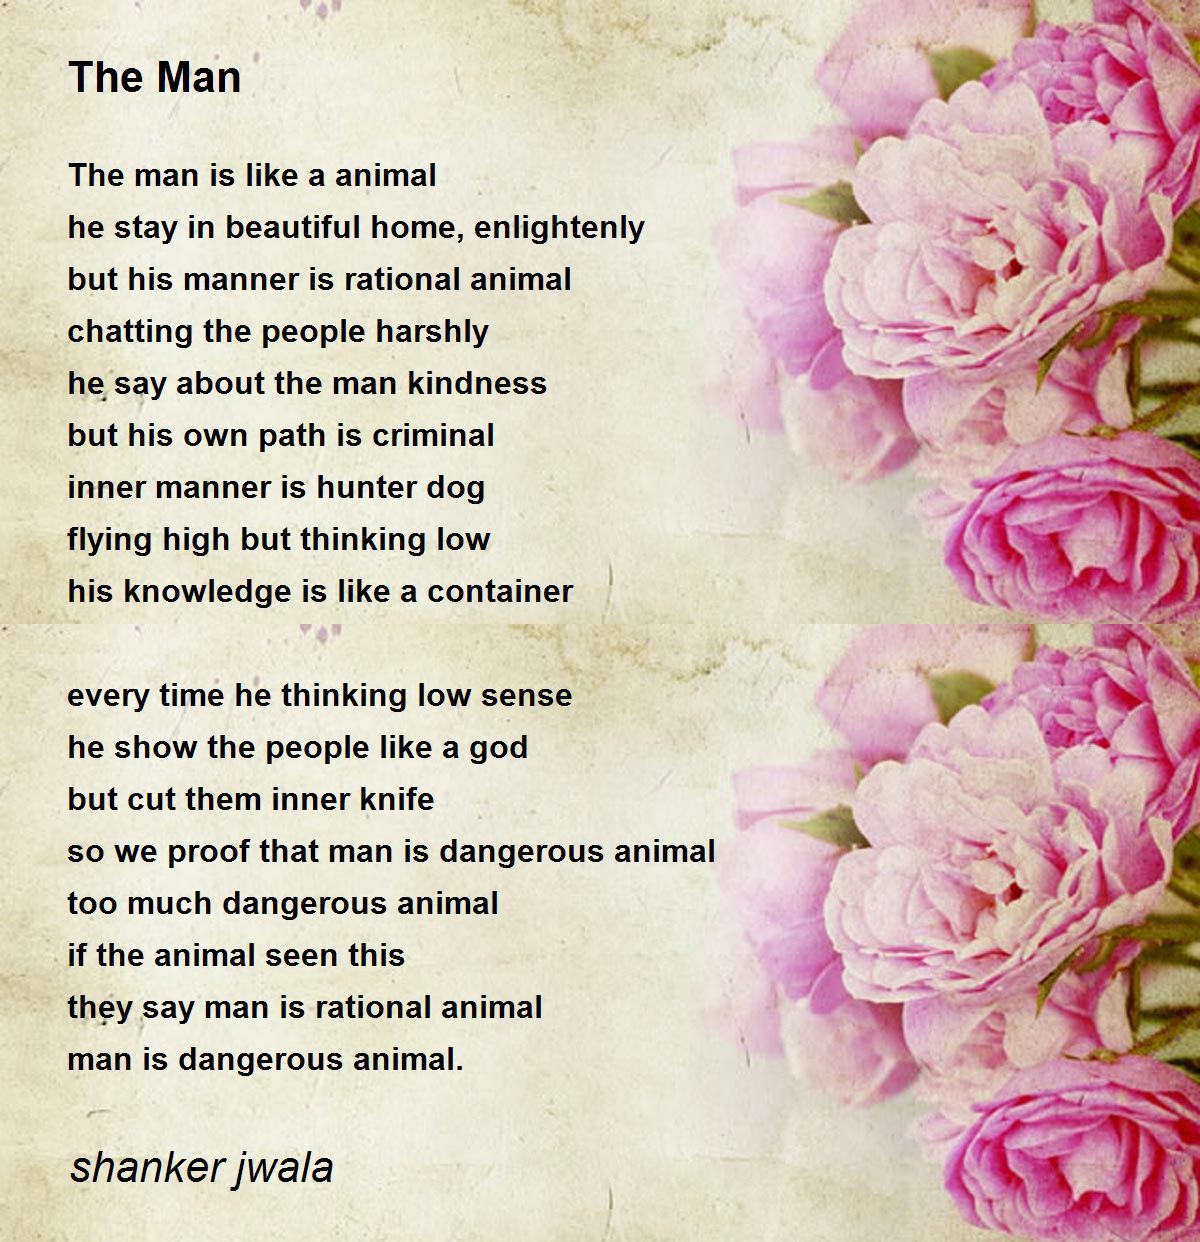 The Man - The Man Poem by shanker jwala